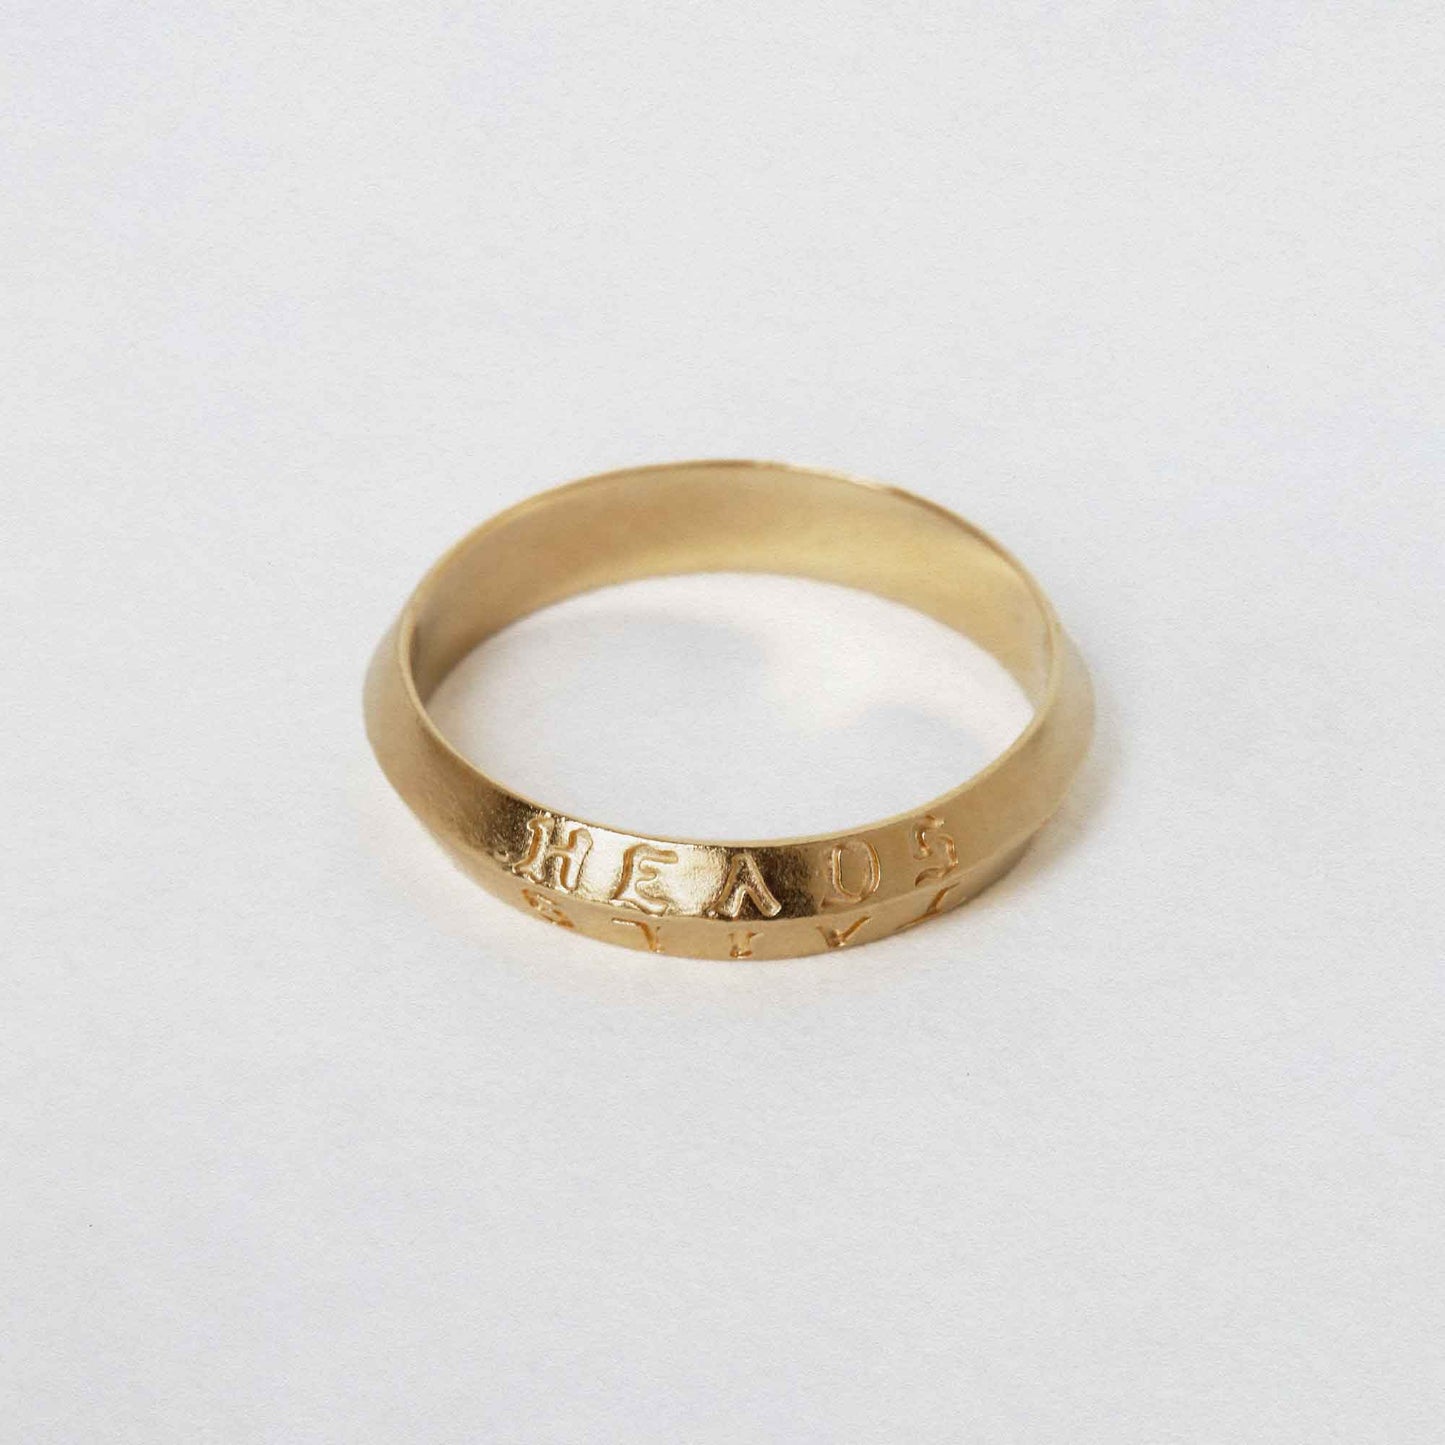 heads + tails engraved on a 9CT solid gold band ring